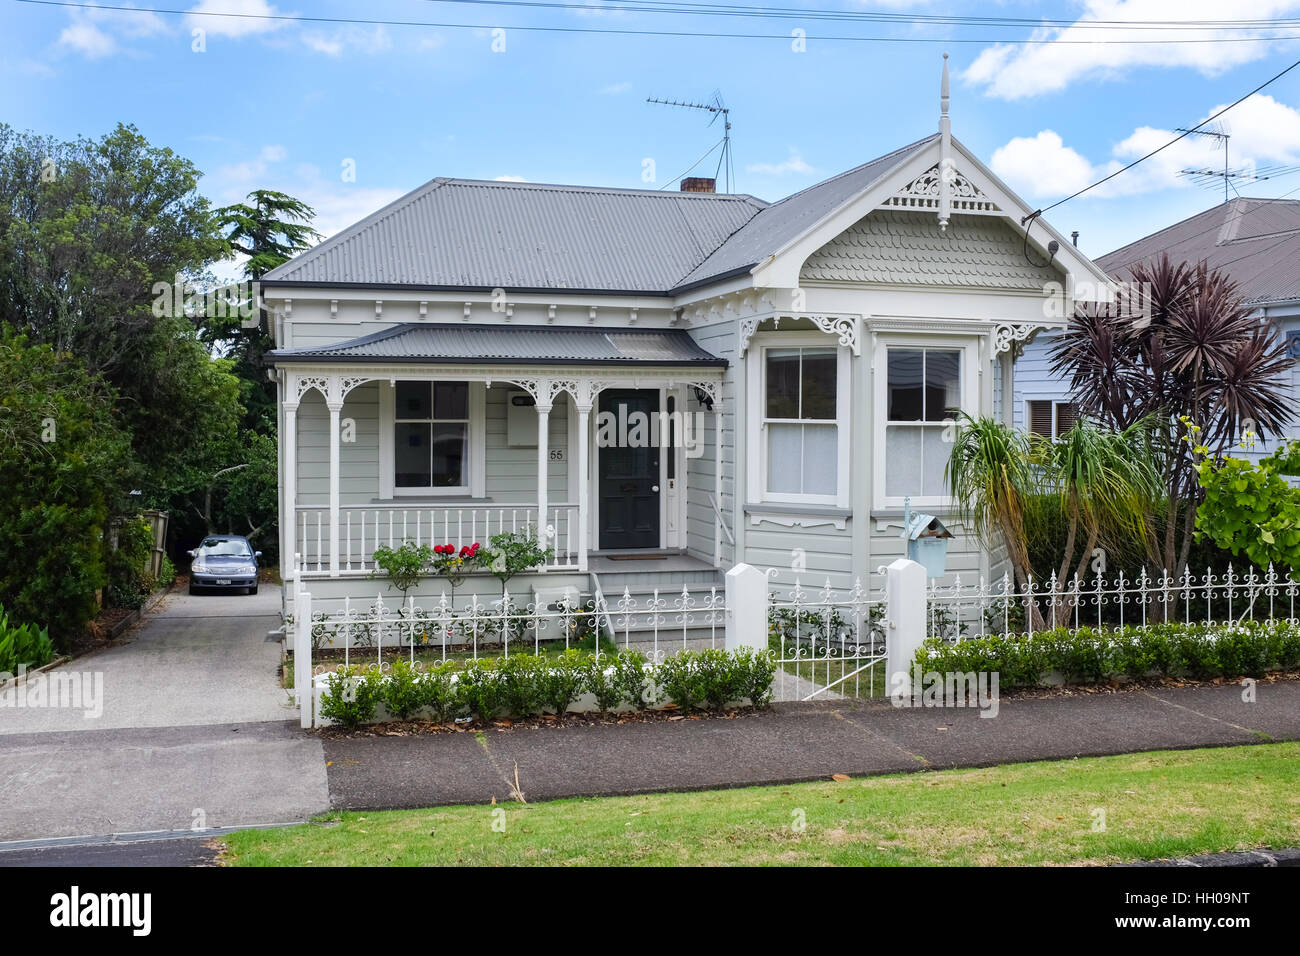 A small house in Devonport, a suburb of Auckland, New Zealand. Stock Photo